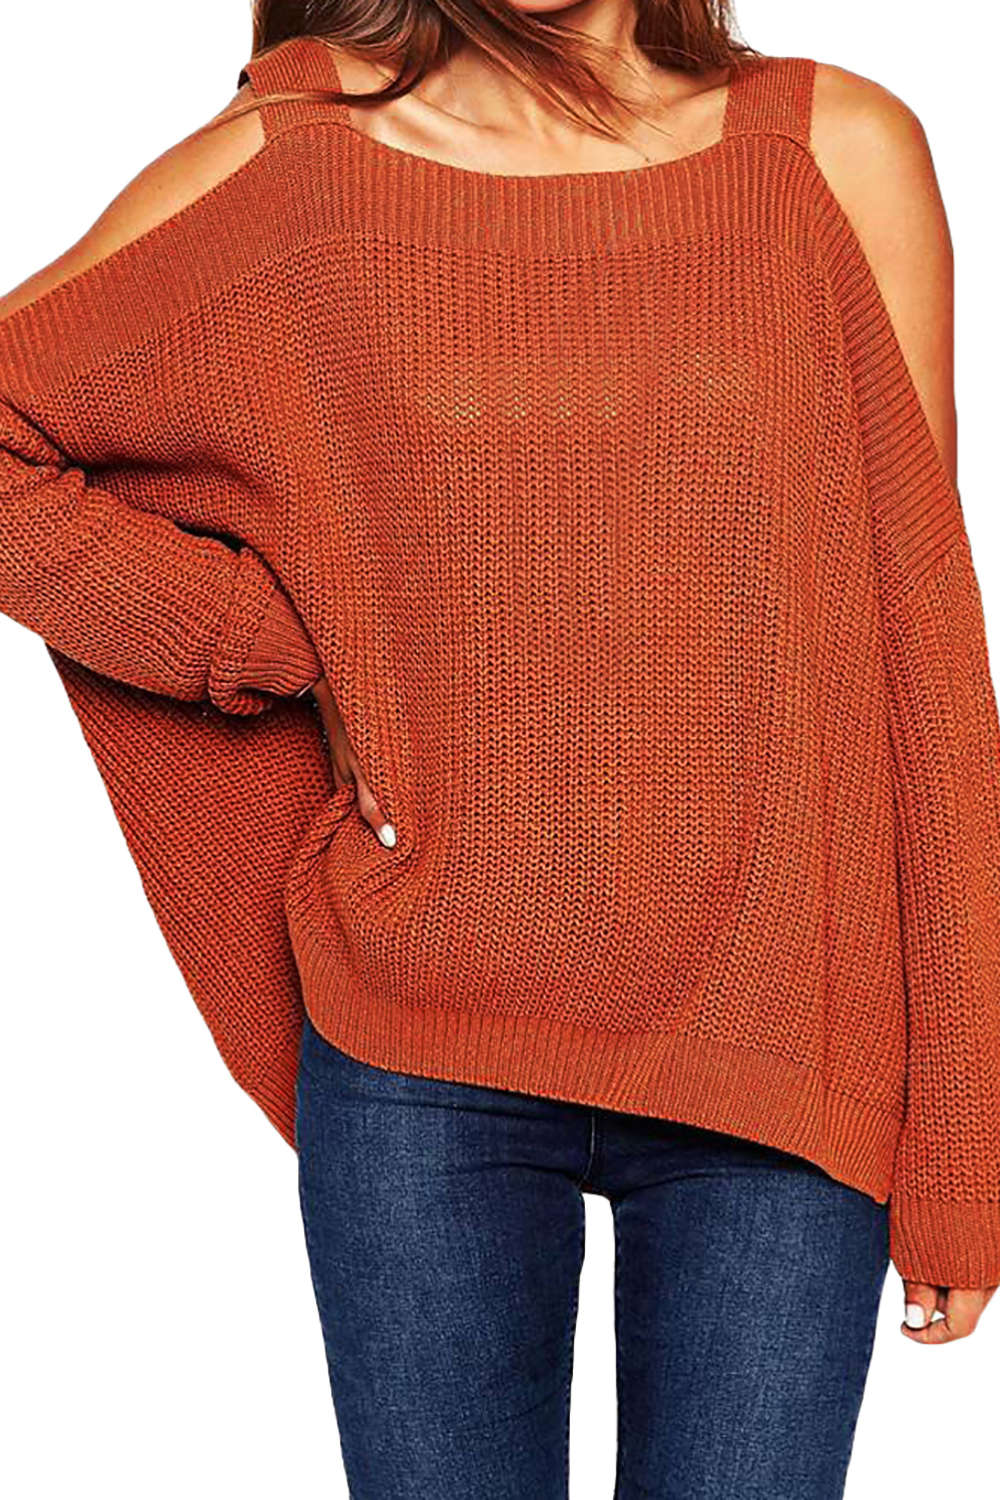 Iyasson New Off-the-shoulder Pullover Sweater